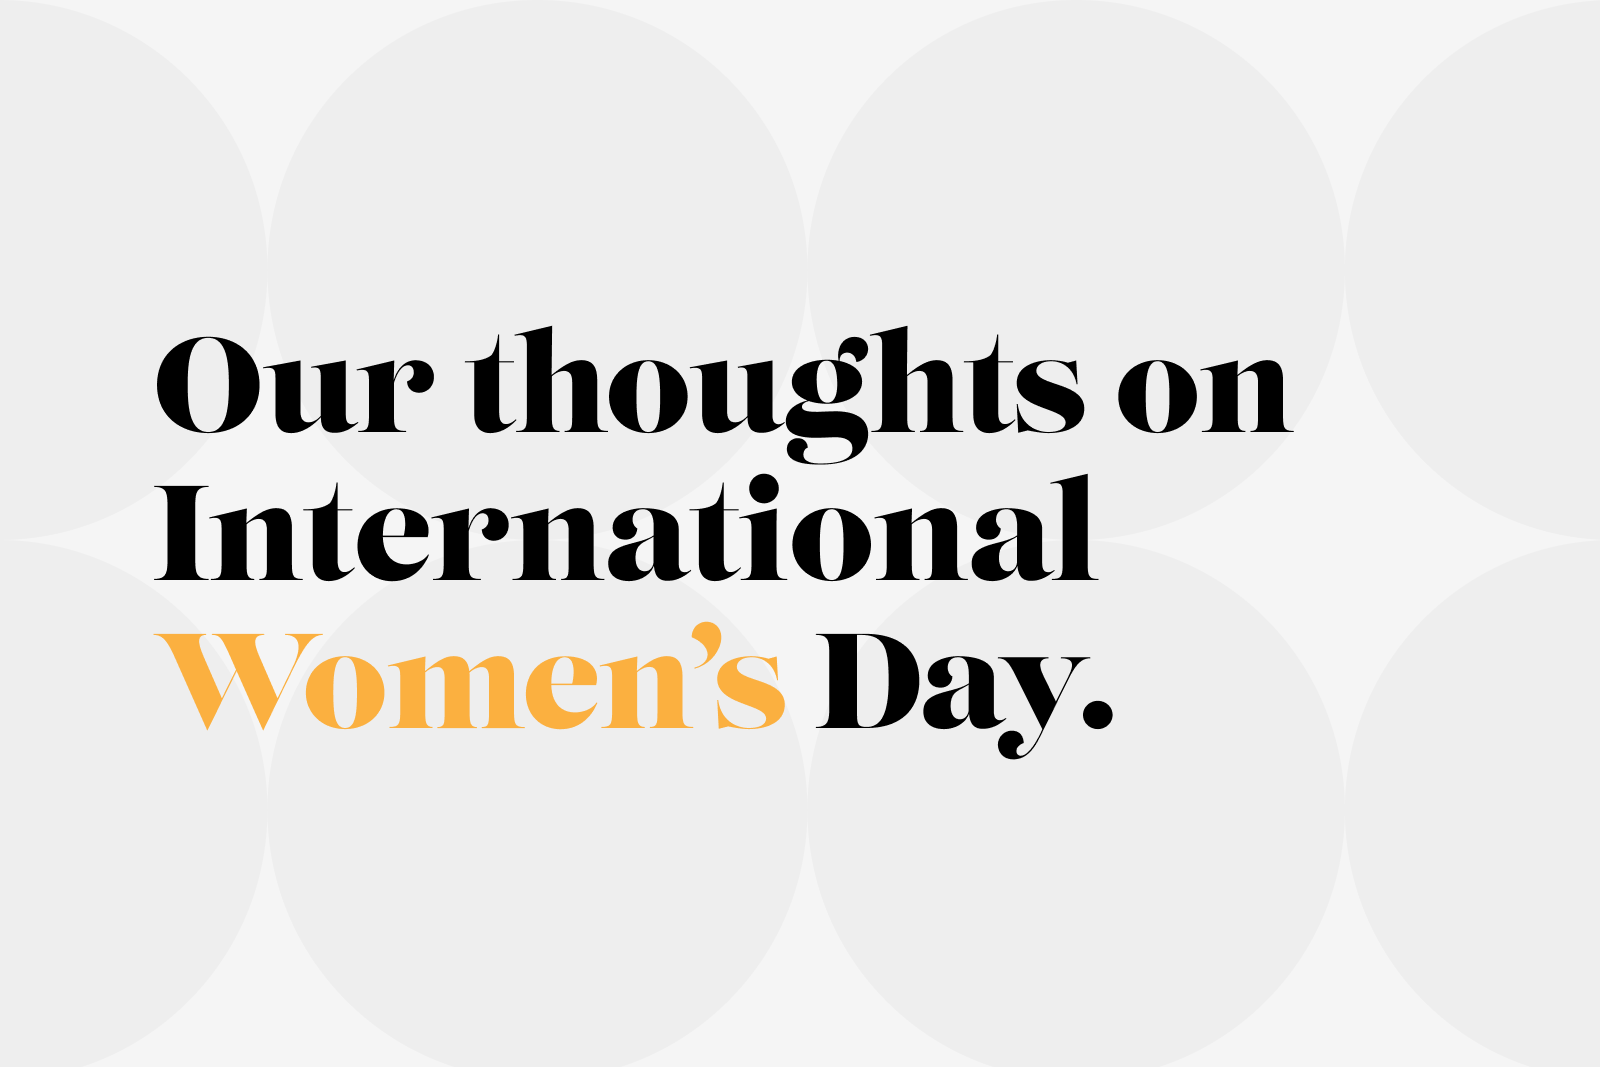 Our thoughts on International Women’s Day